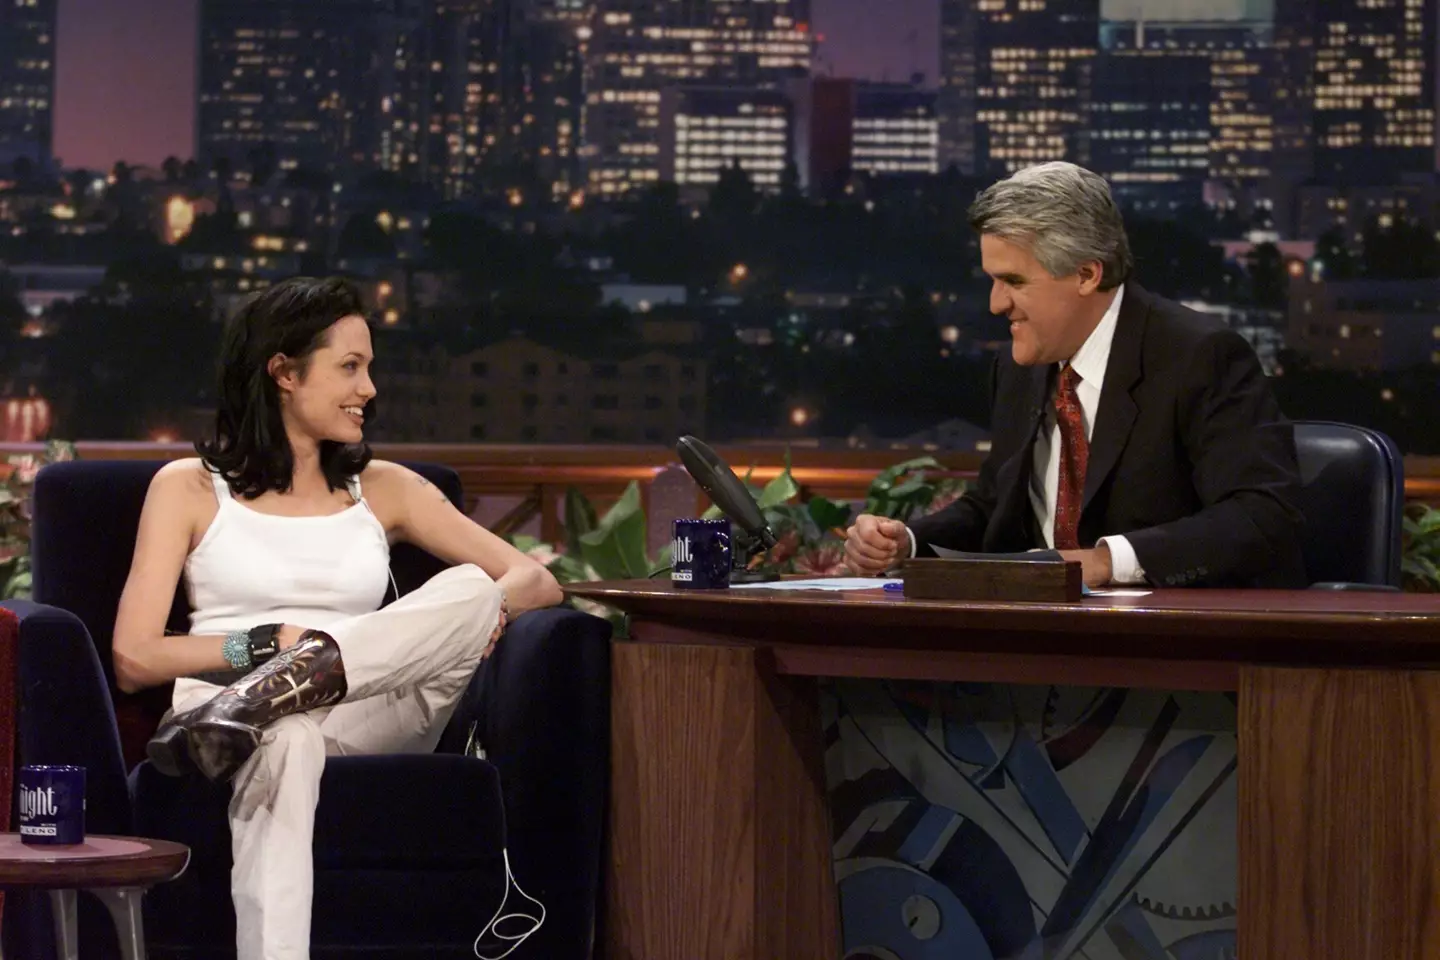 Jolie called him out for his remarks on The Tonight Show with Jay Leno in 2000.